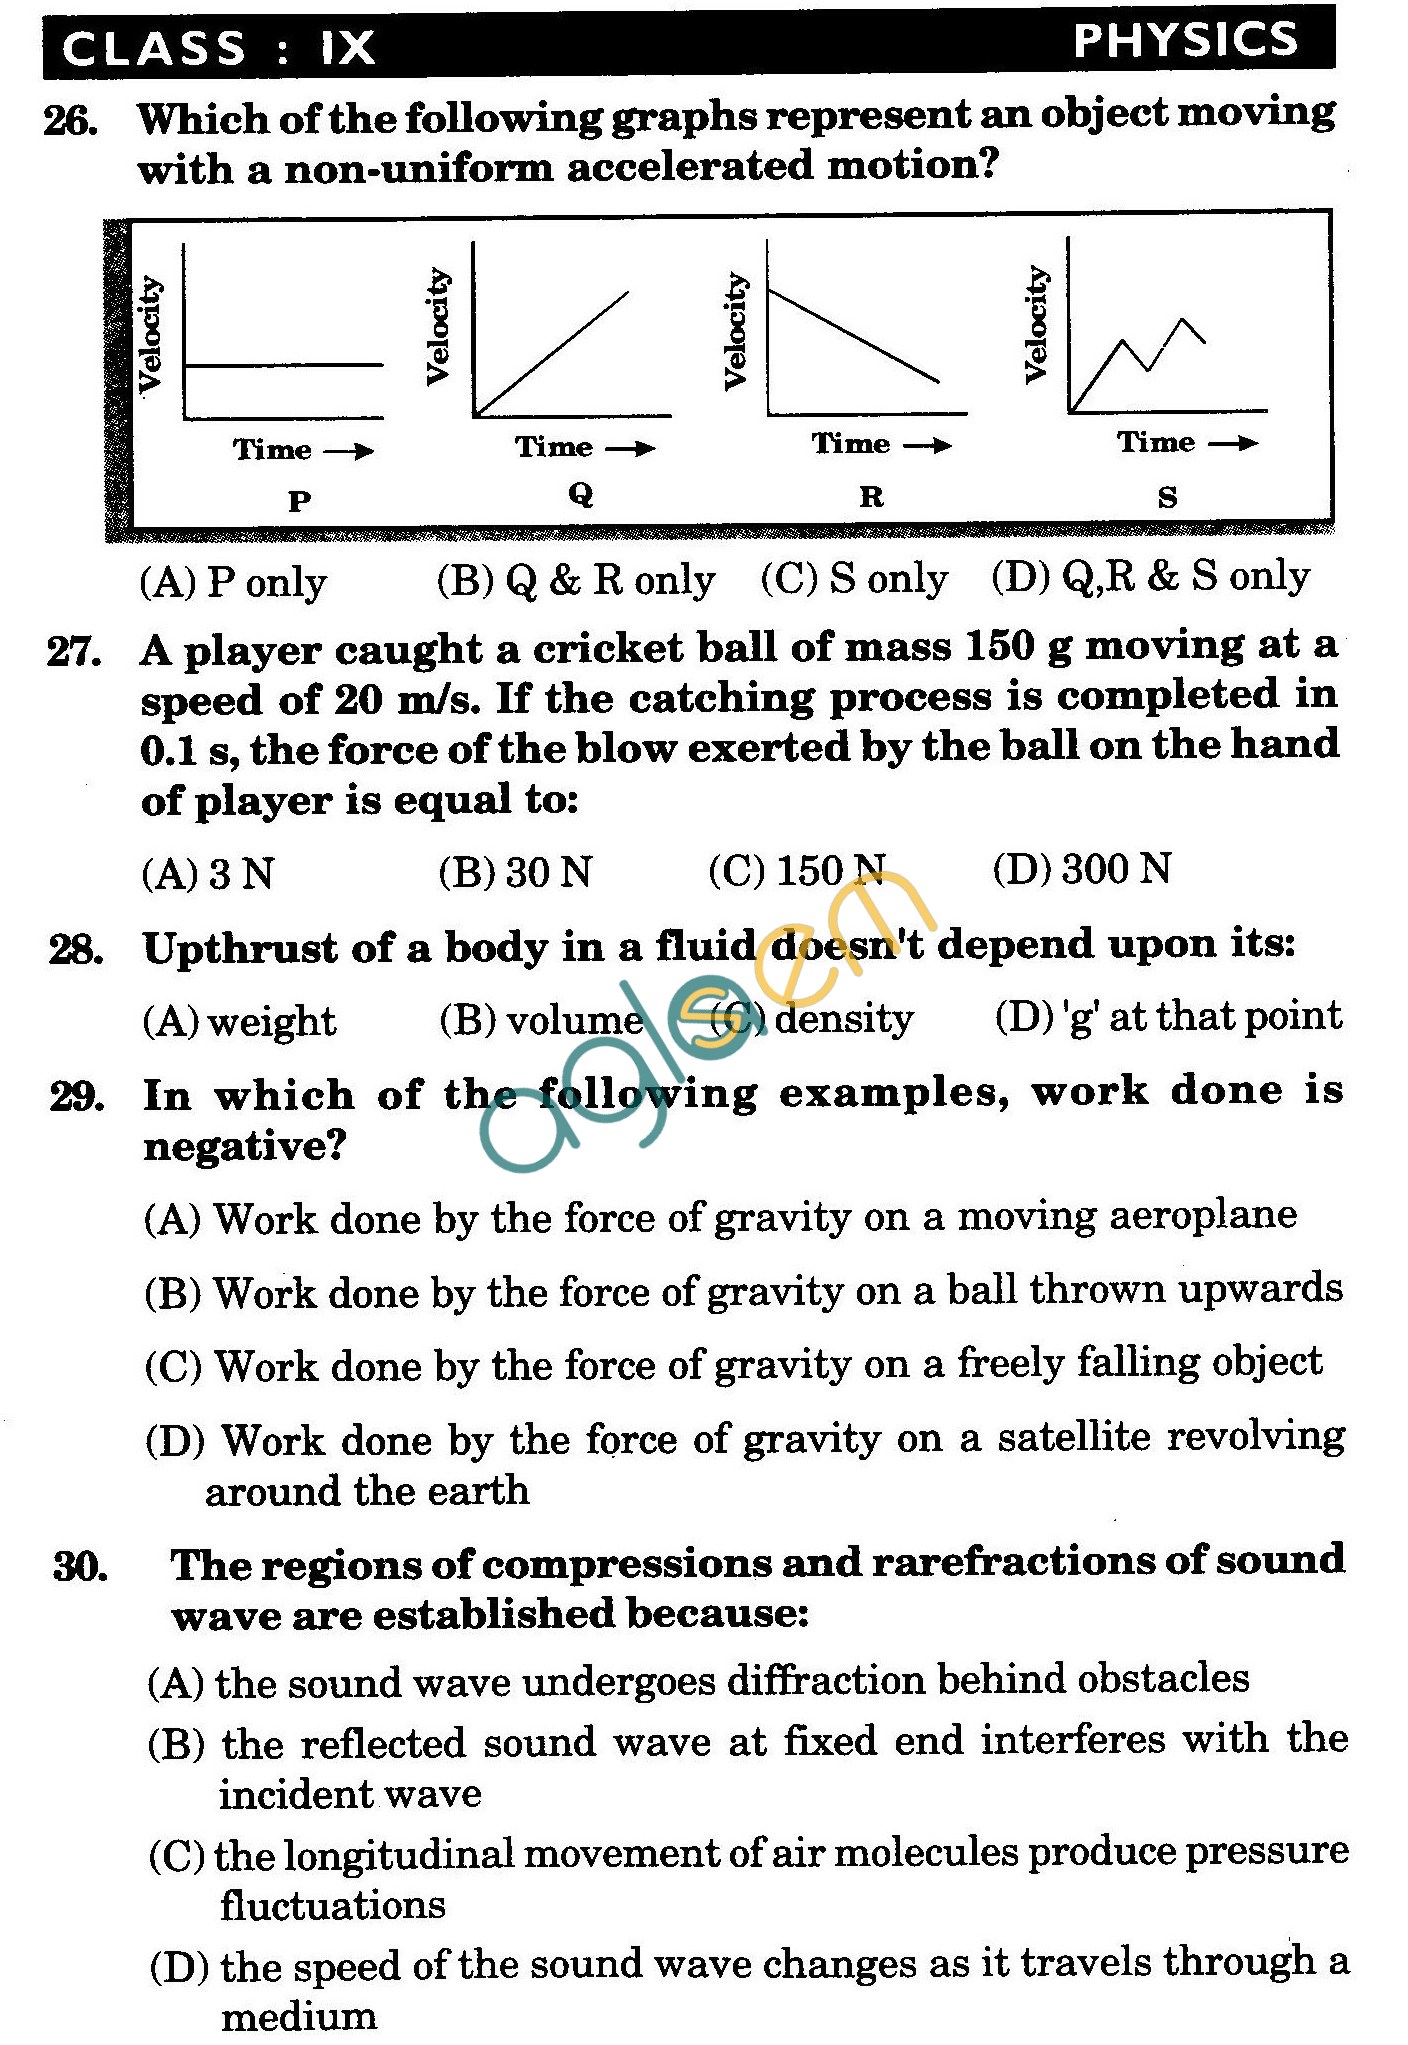 NSTSE 2009 Solved Question Paper for Class IX Physics